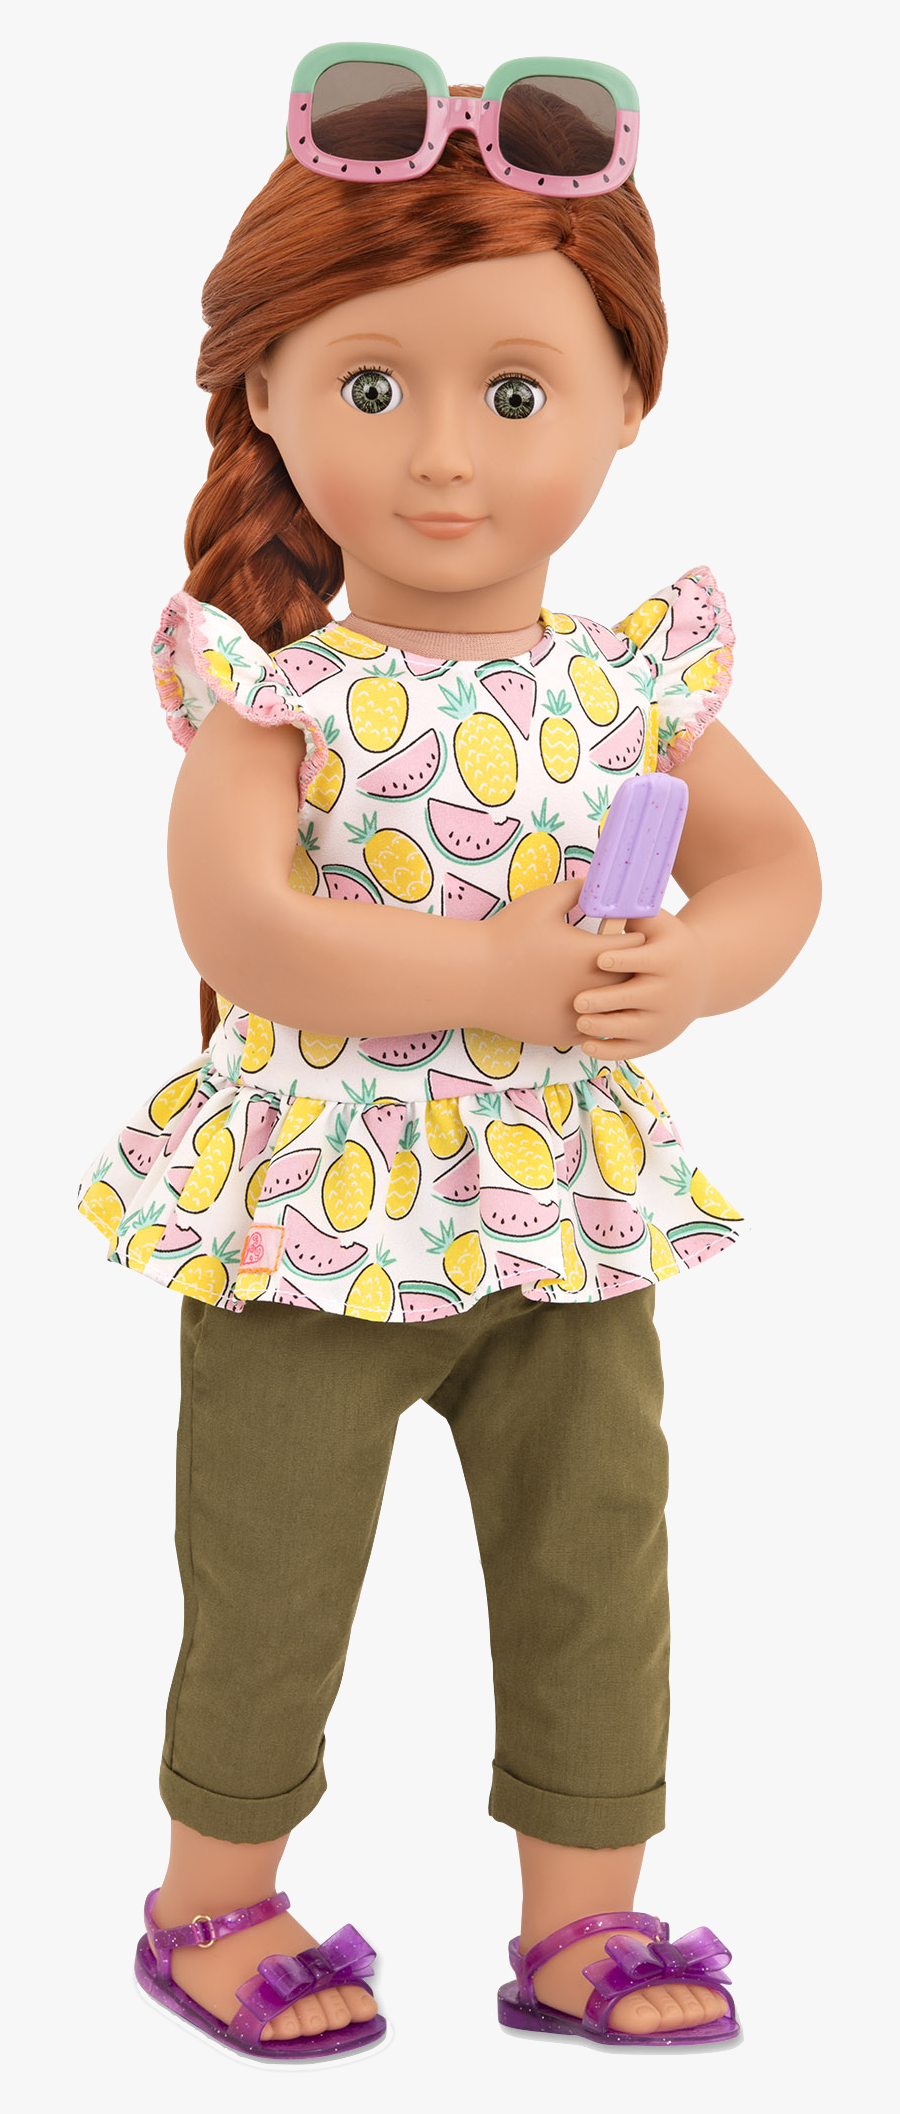 Cutie Fruity Outfit Sia Holding Popsicle - Doll, Transparent Clipart